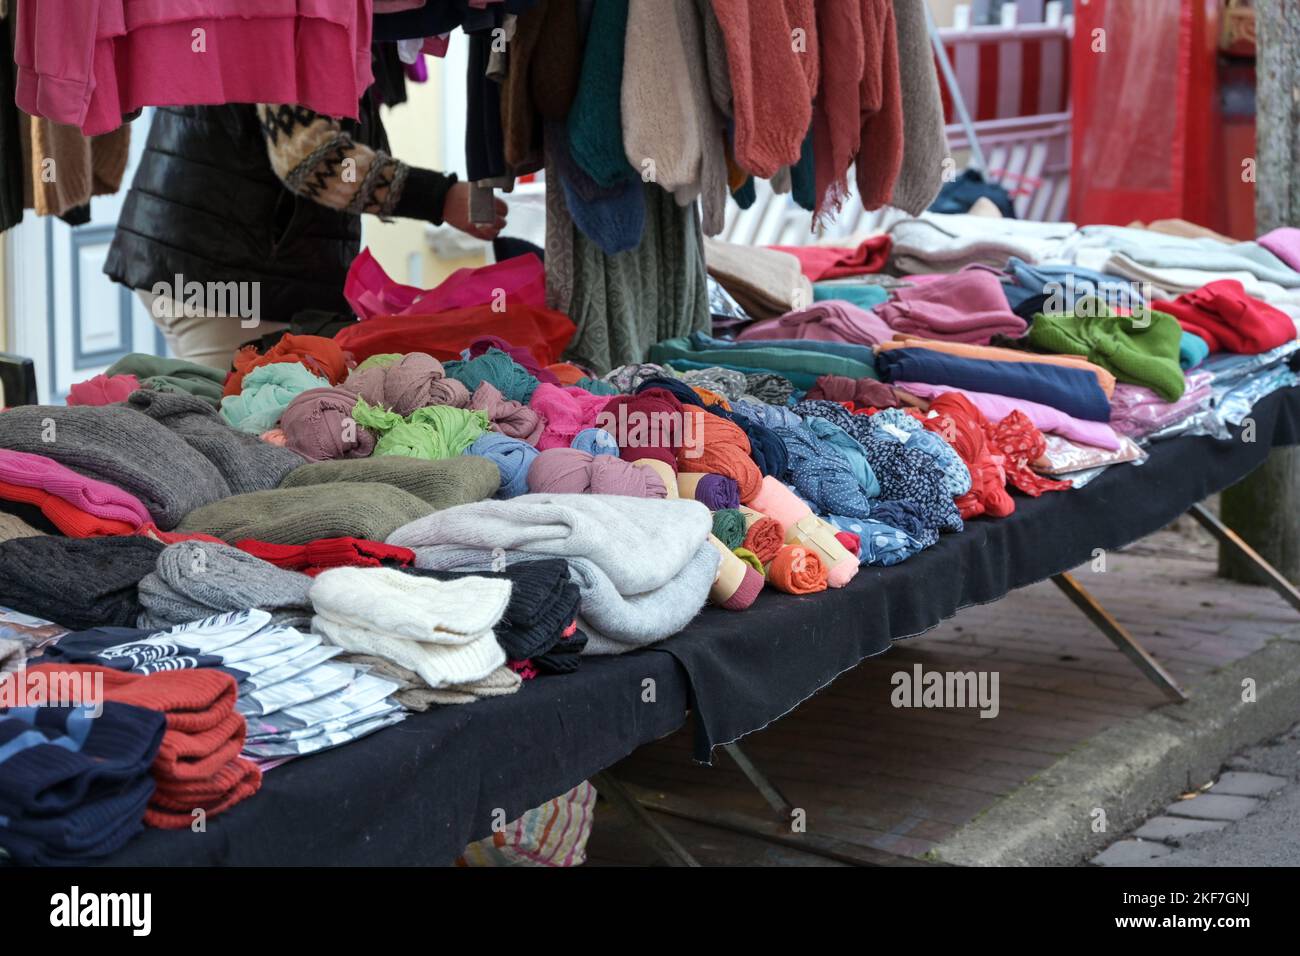 Colorful warm clothes for sale in a stall at an autumn and winter market around Christmas, selected focus Stock Photo